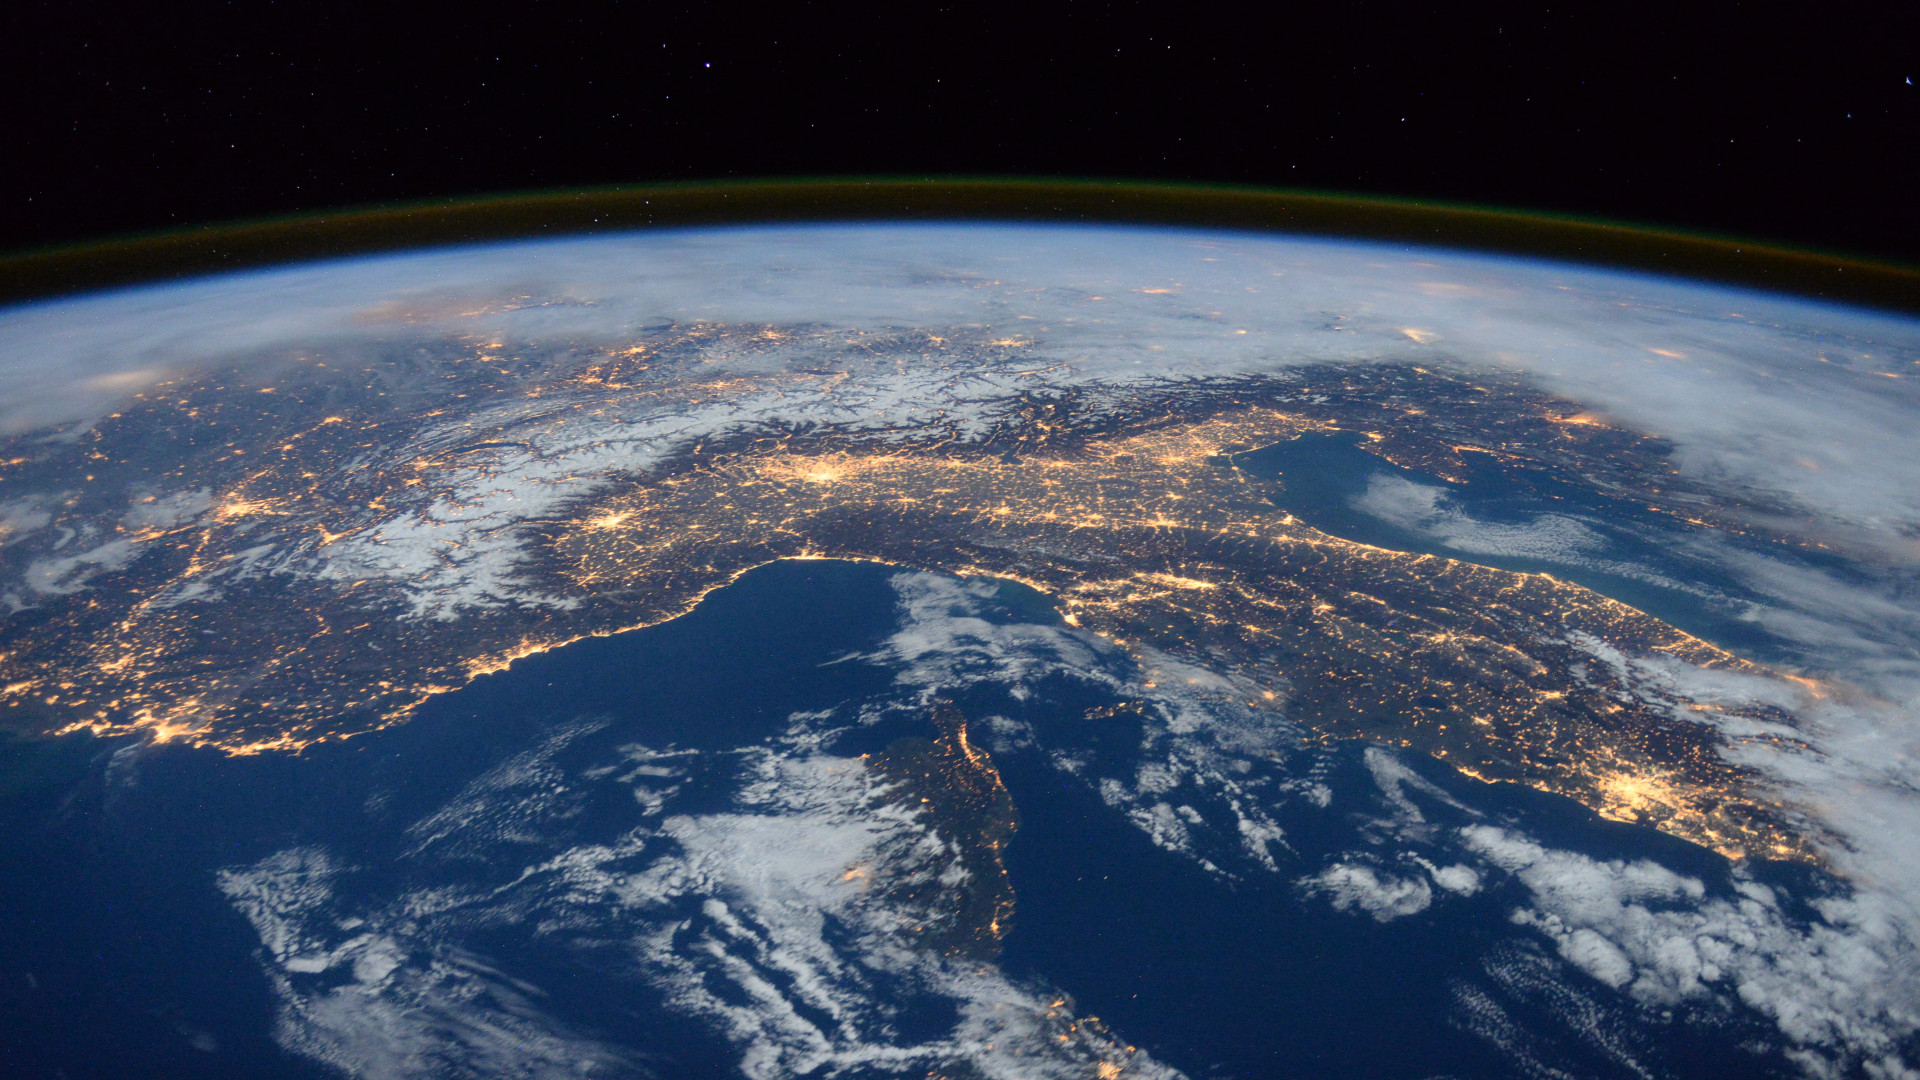 Global Space Markets Challenge: Longlists announced